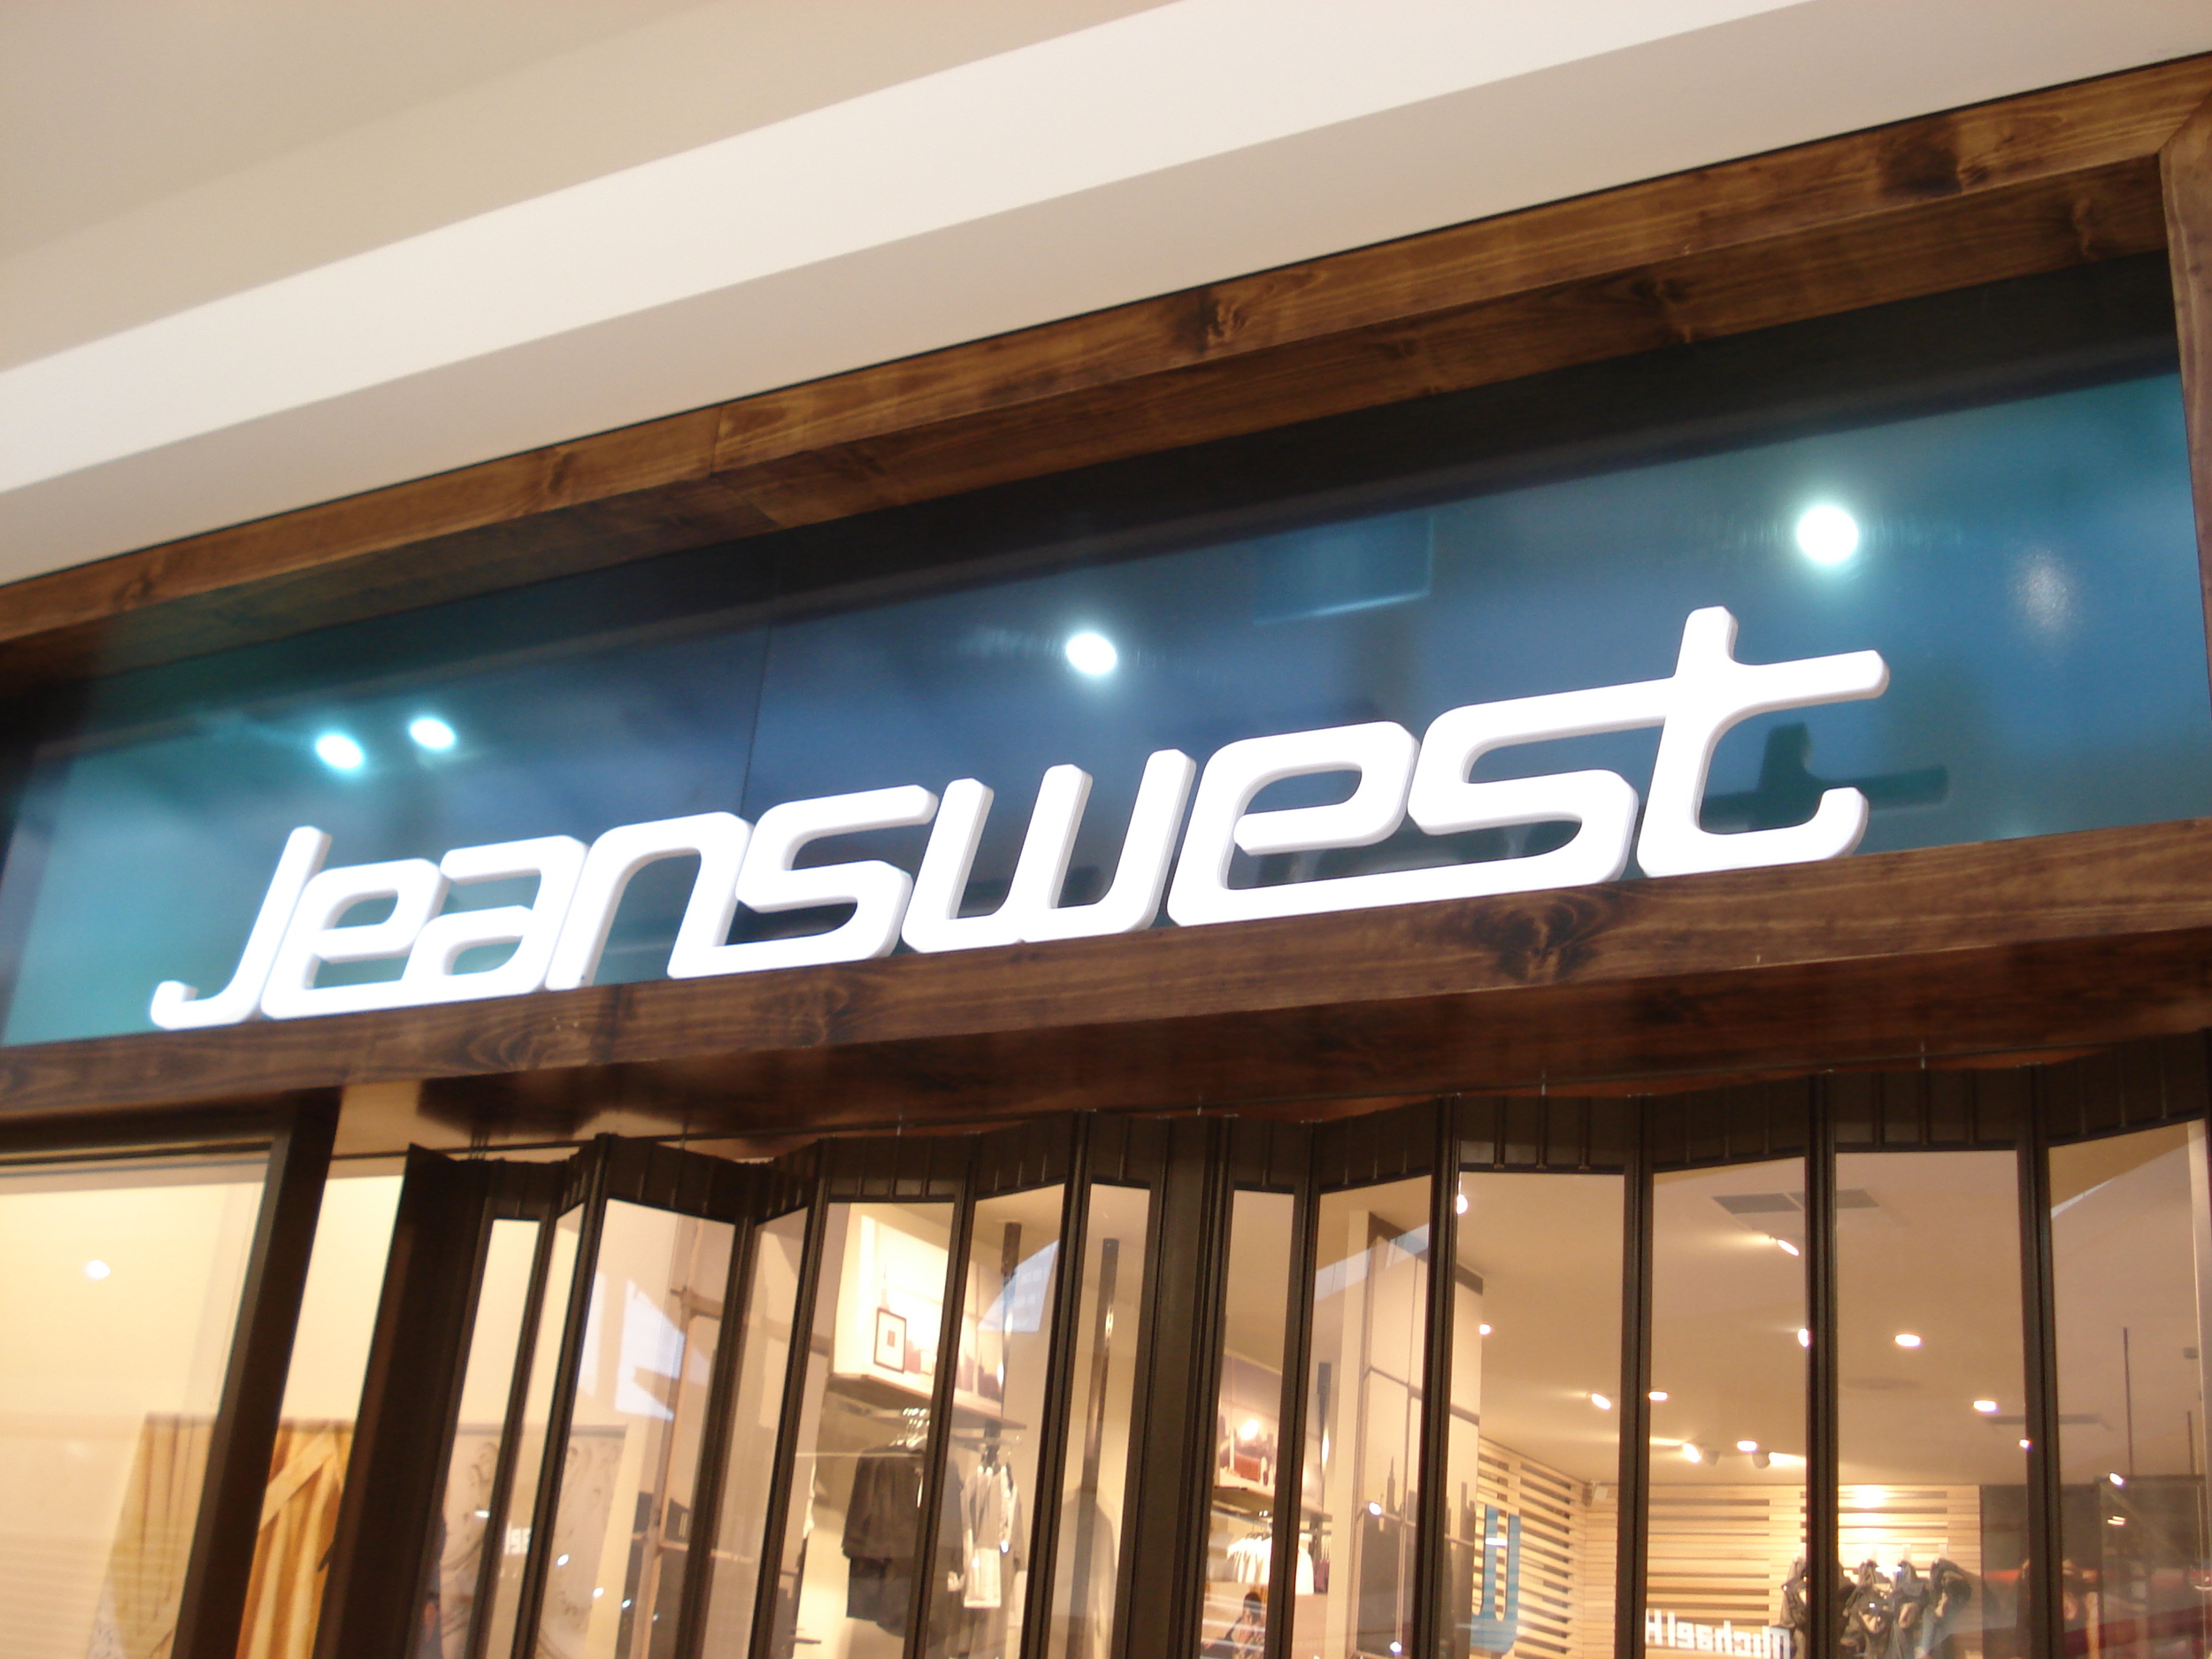 Mouldings for Jeans west signage